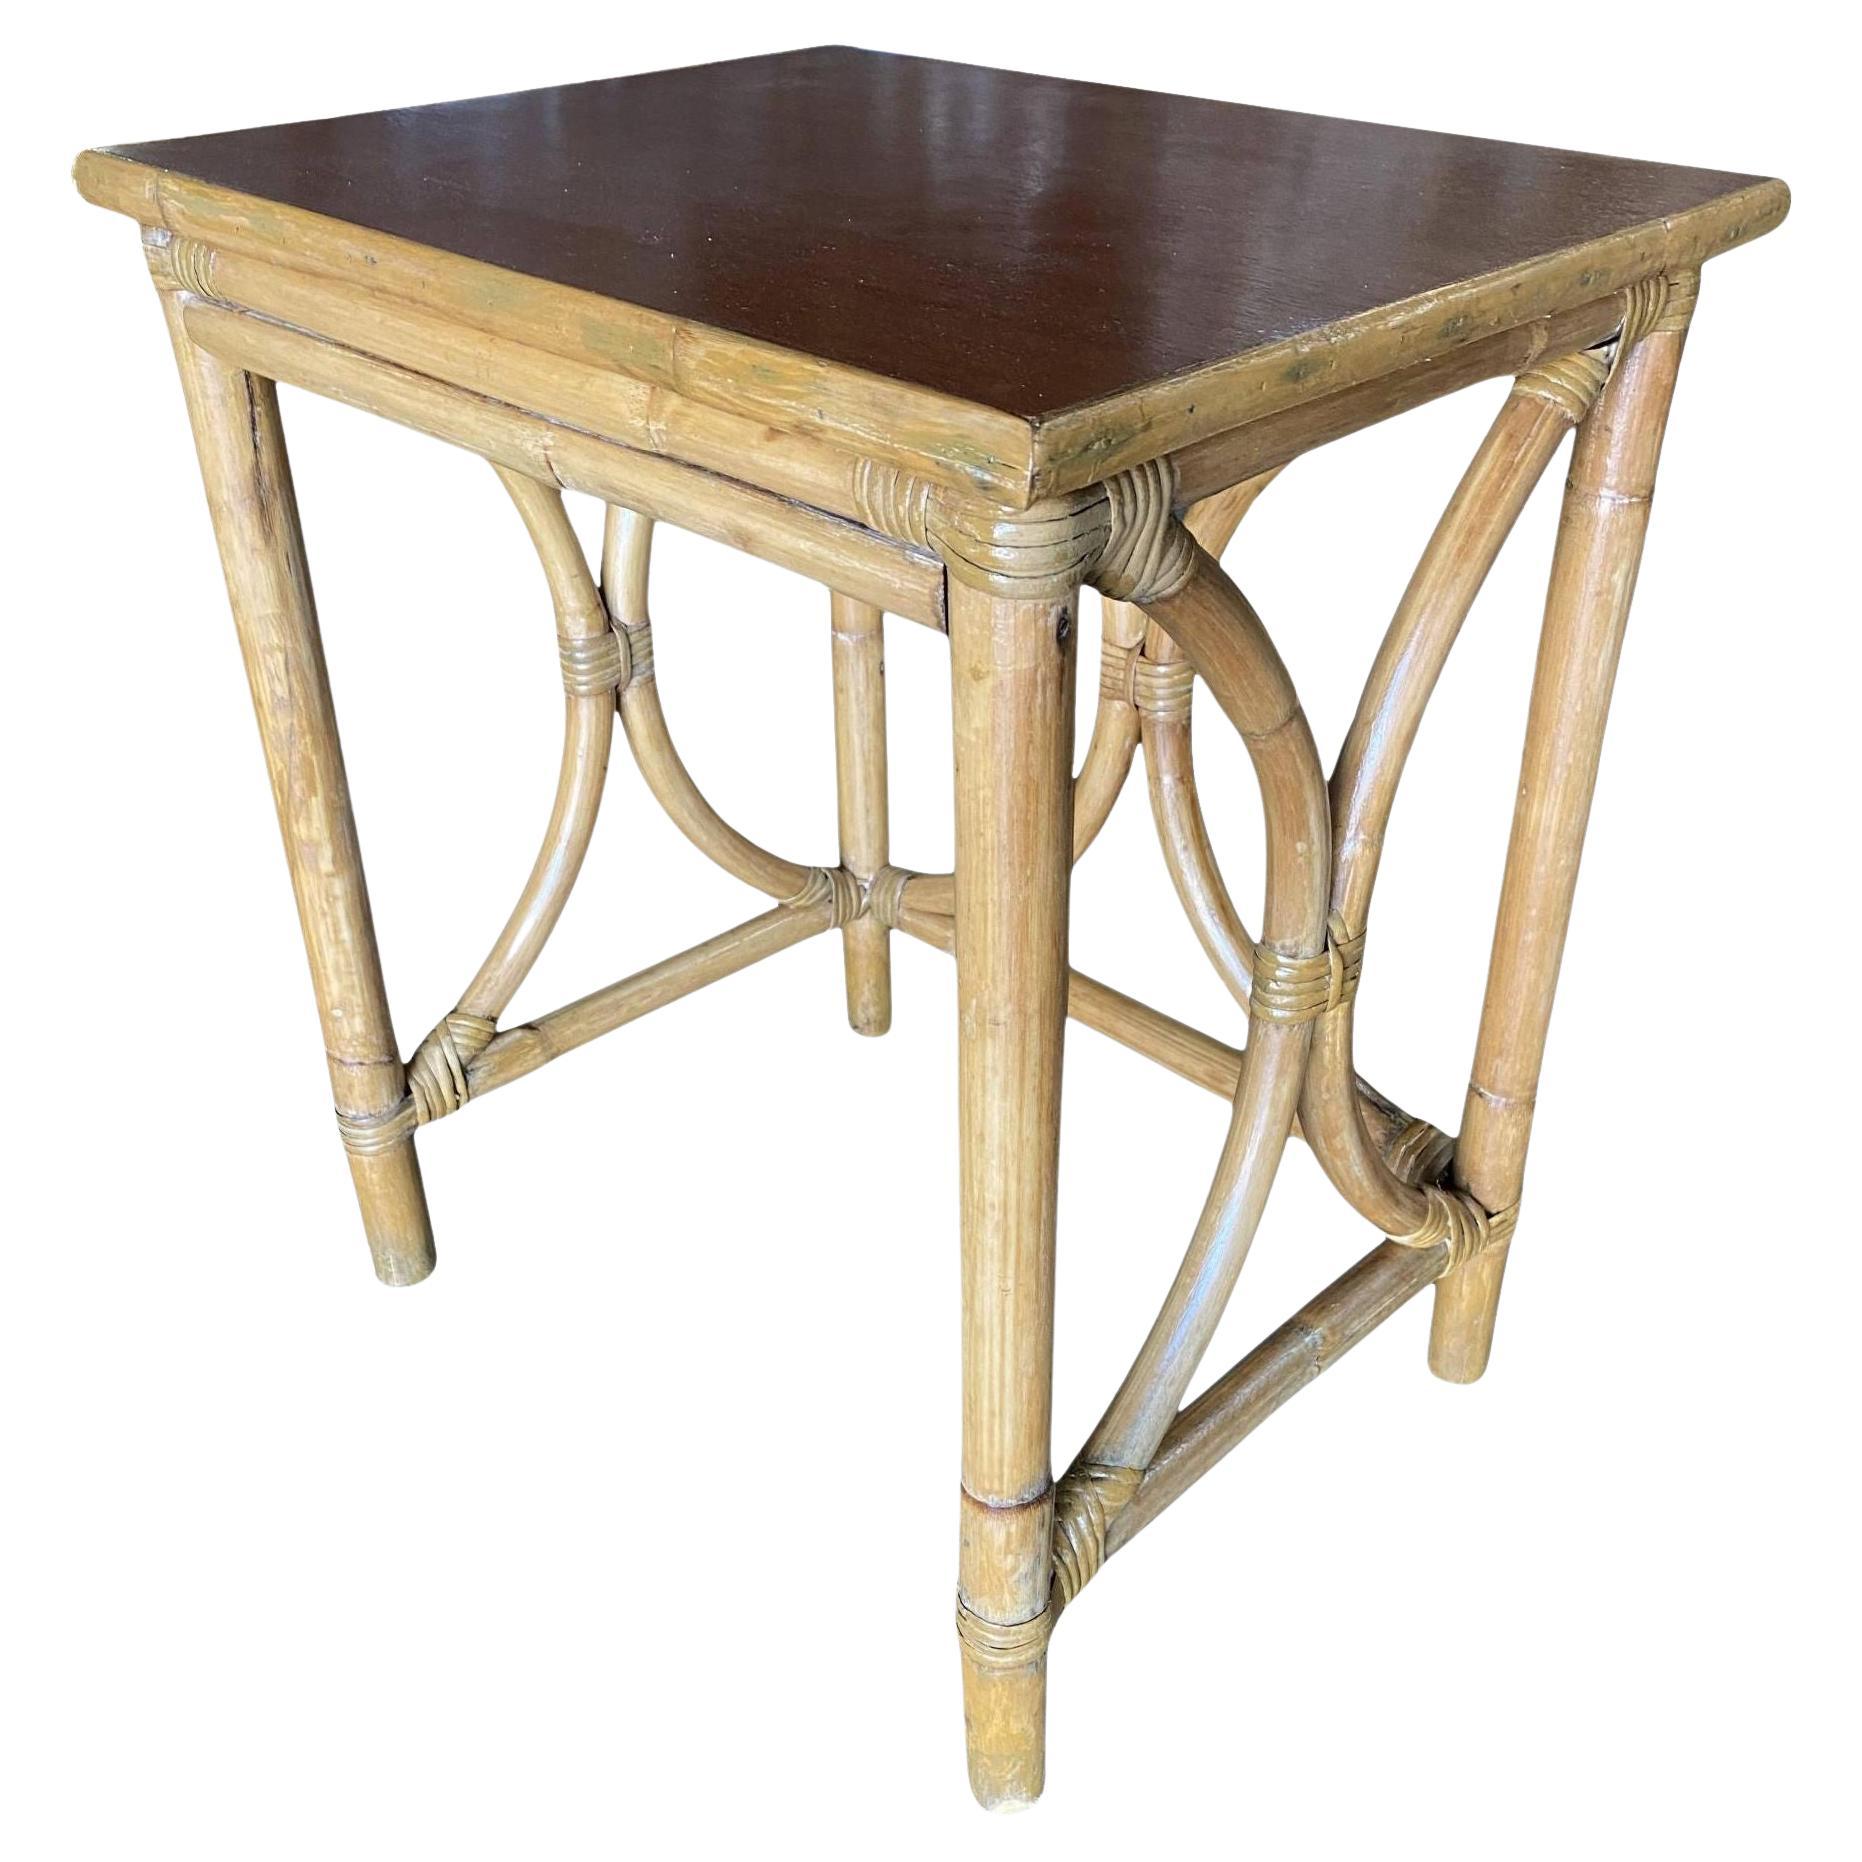 Restored 1950s "Hour Glass" Rattan Side Table with Acacia Koa Wood Top For Sale